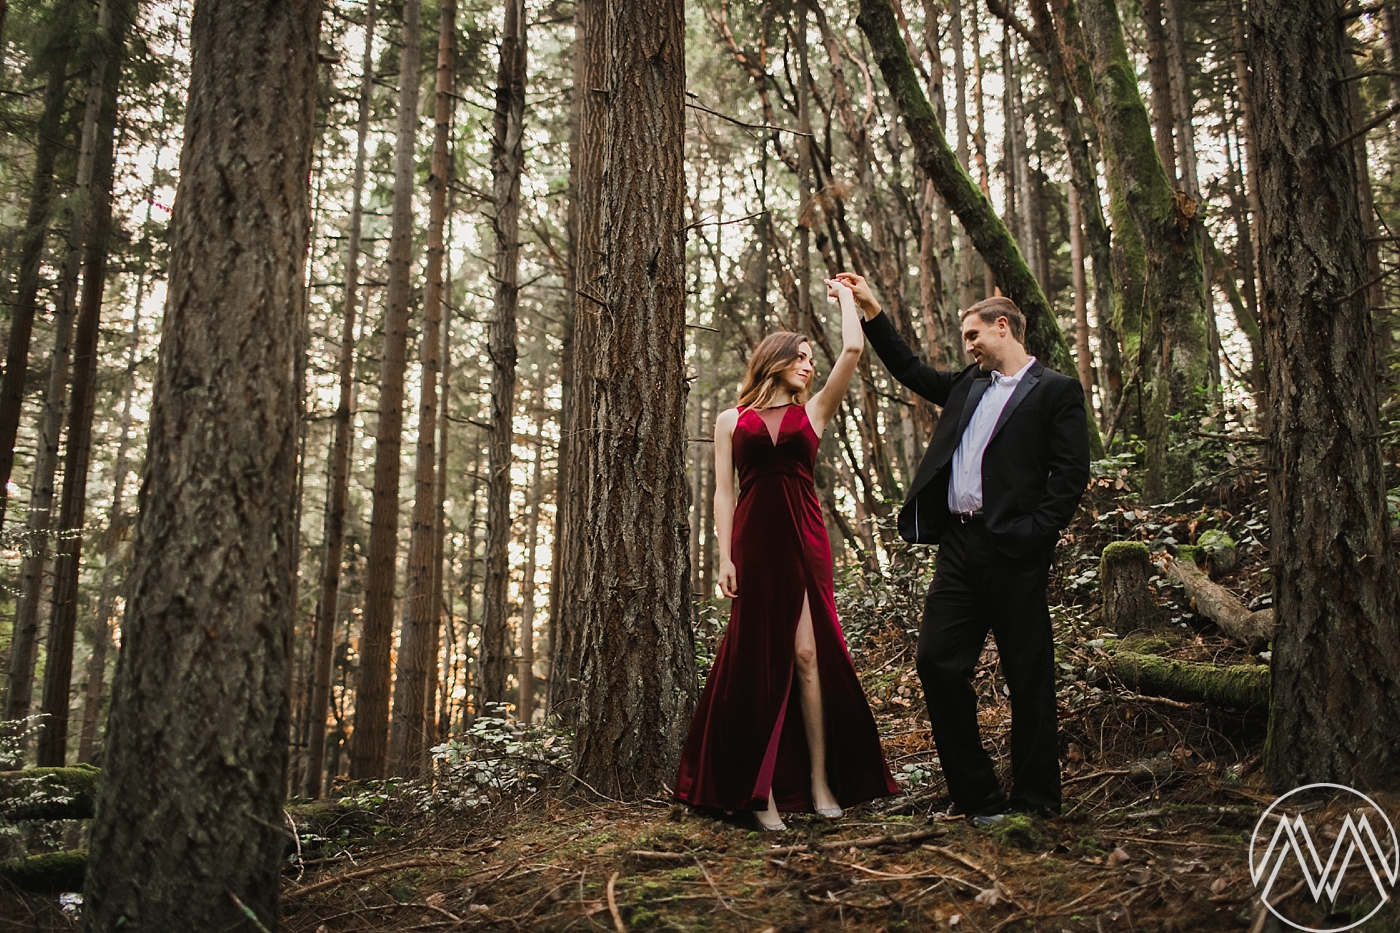 Dressy engagement photos at Point Defiance Park in Tacoma, WA | Megan Montalvo Photography